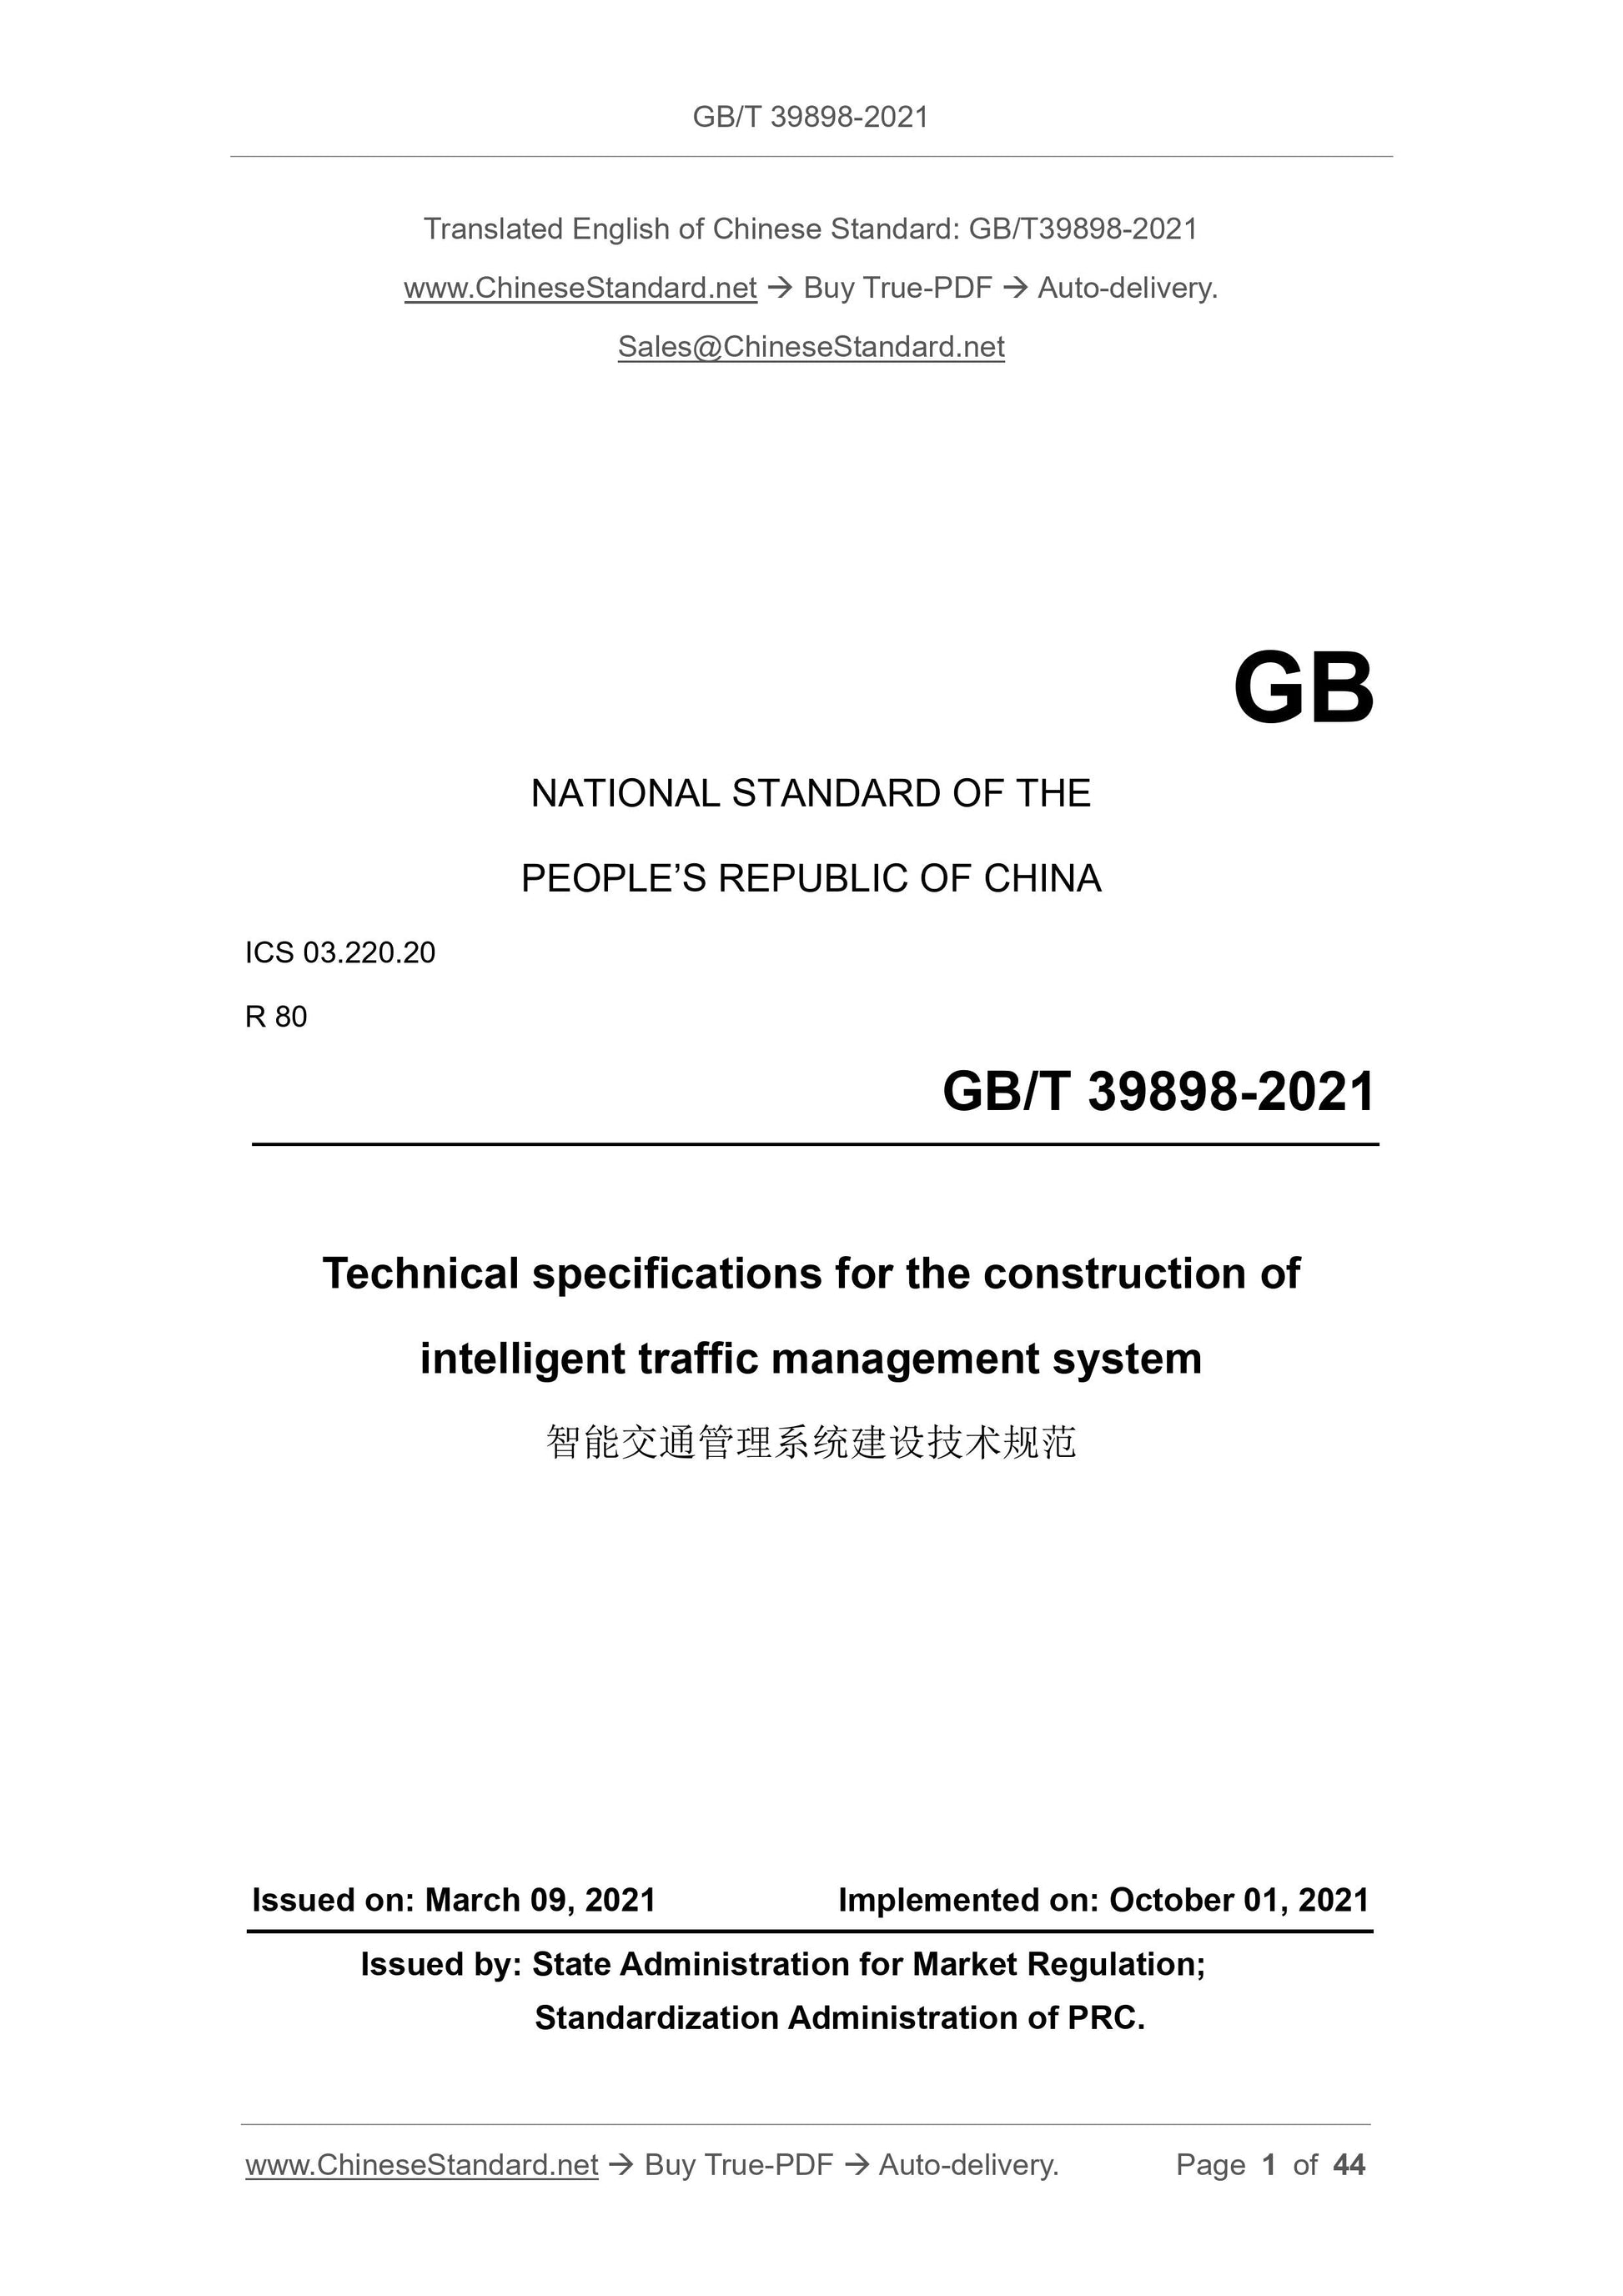 GB/T 39898-2021 Page 1